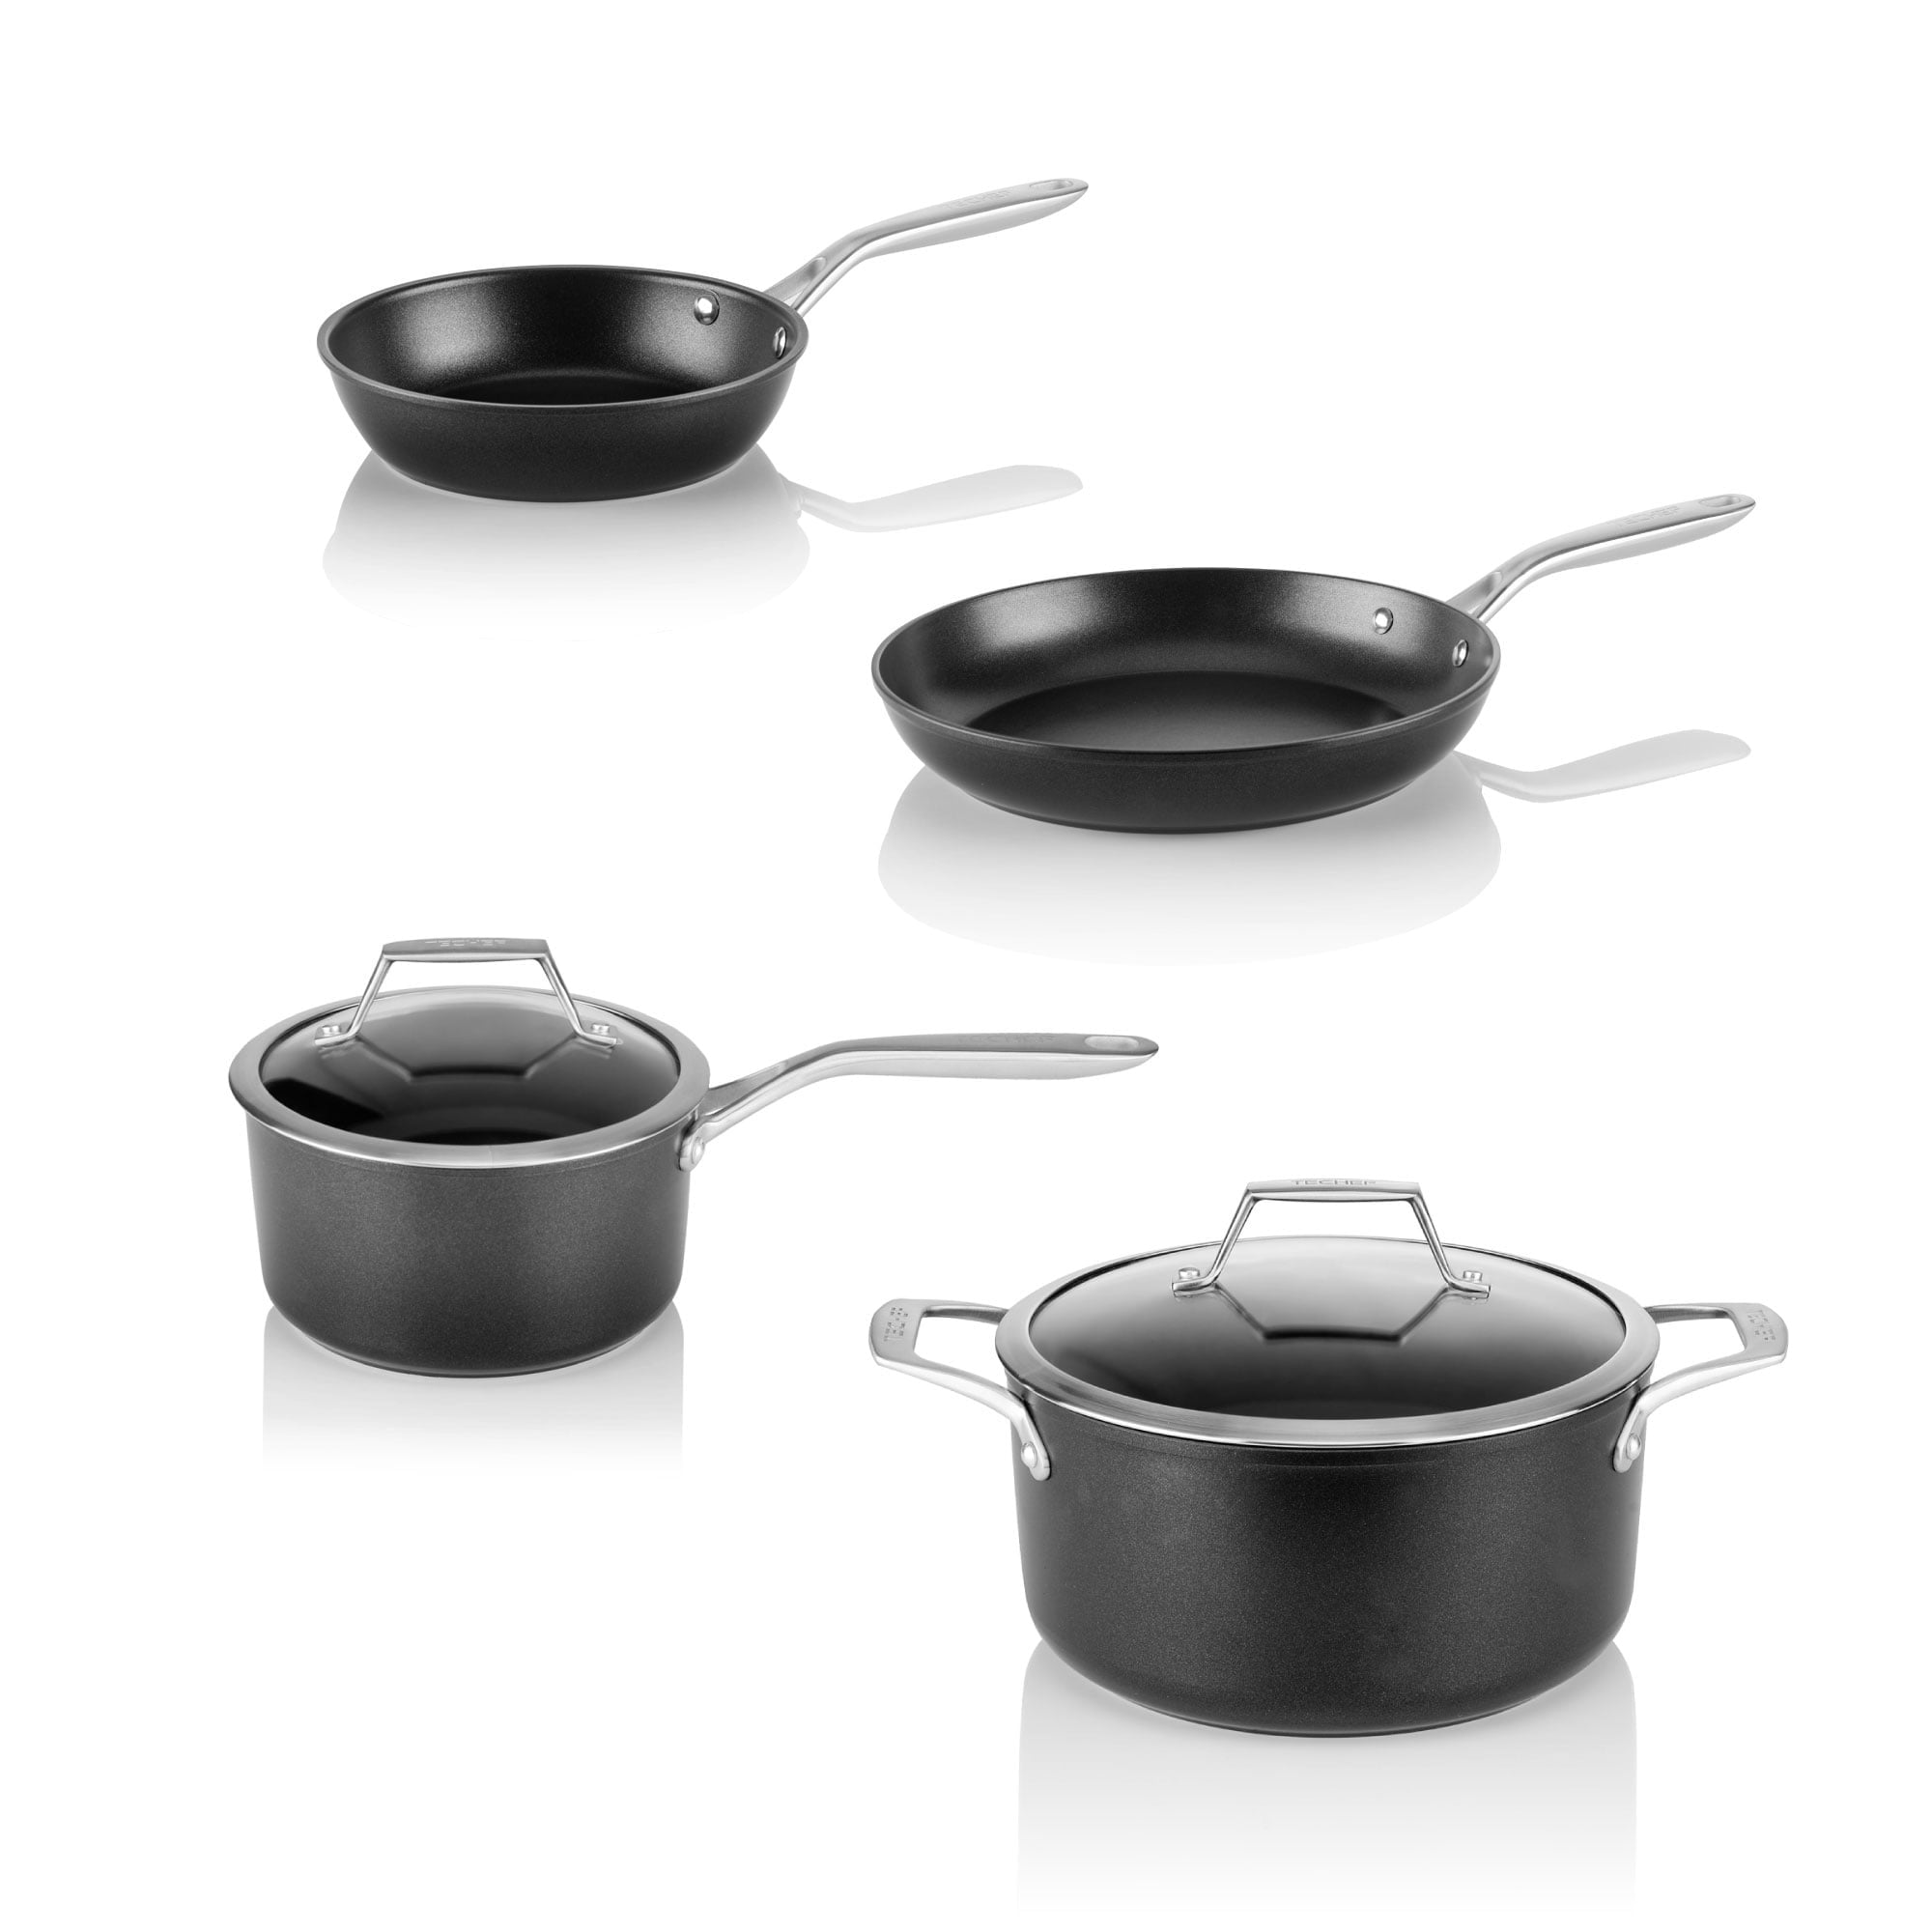 TECHEF Onyx Collection - 6 Piece Cookware Set 